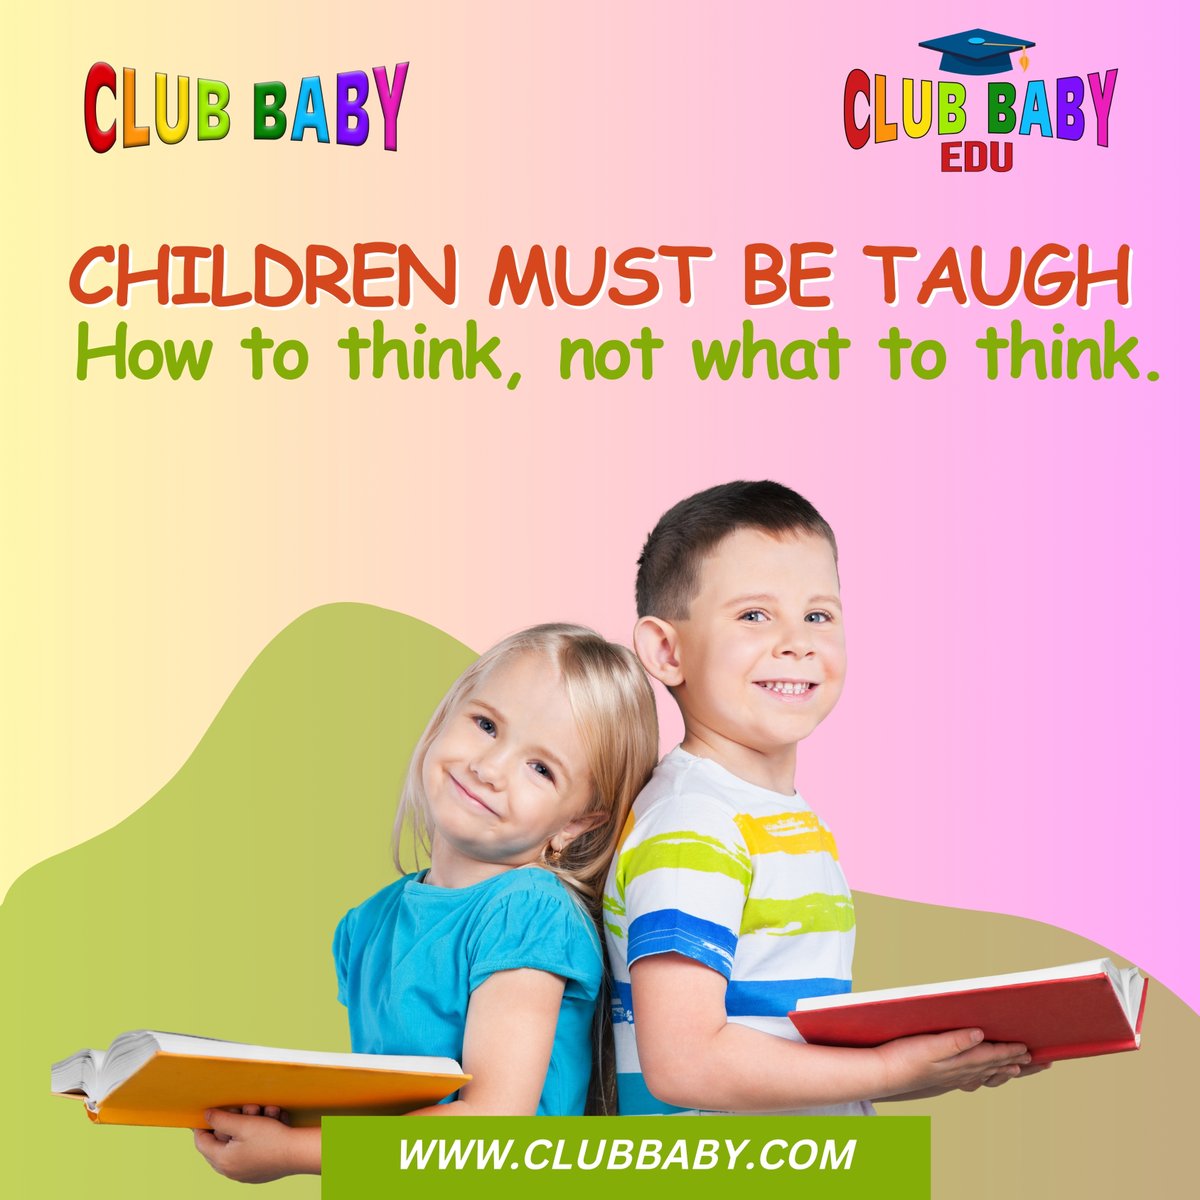 How do you prepare your child for a world that is constantly changing and evolving? By teaching them how to think, not what to think. 🙌

#ClubBabyEdu
#CreativeThinking
#CriticalThinking
#FutureReady
#LearningIsFun
#NurtureCuriosity
#EducationMatters
#ThinkDifferent